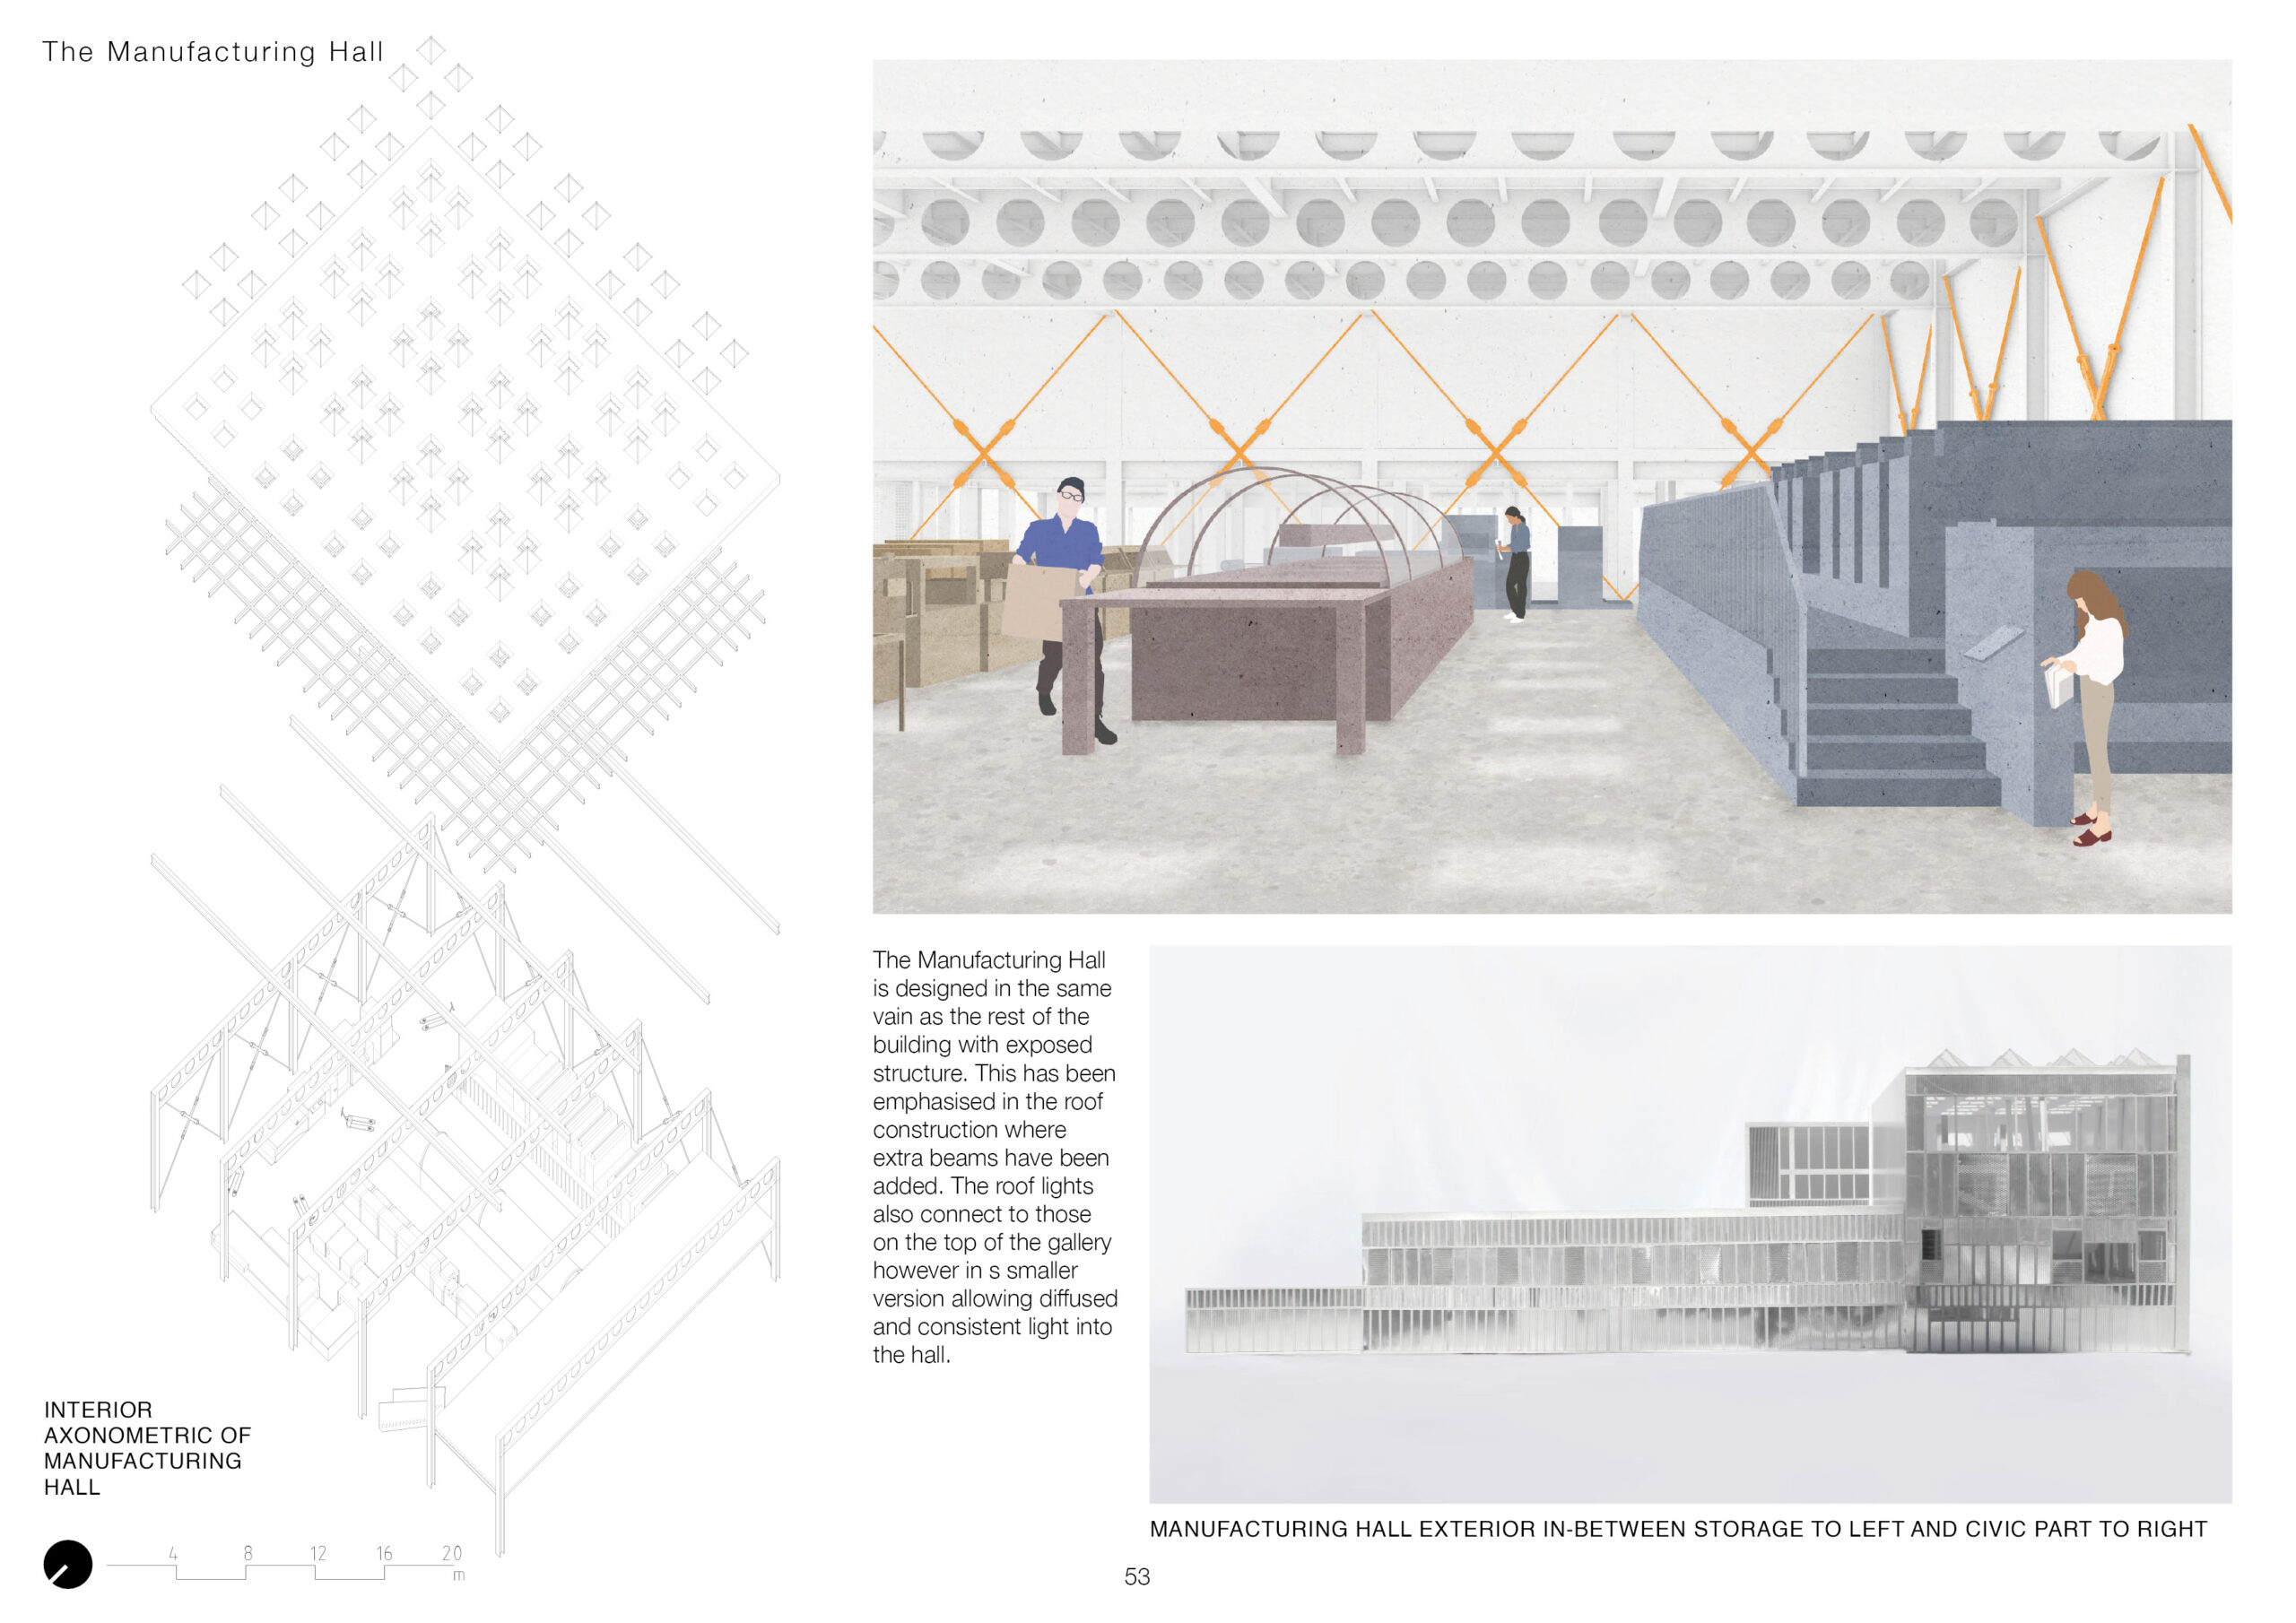 portfolio page 1 has an axonometric drawing of the manufacturing hall to the left. The left shows the manufacturing hall has been rendered to the right which shows all white structure bar the bracing which is orange